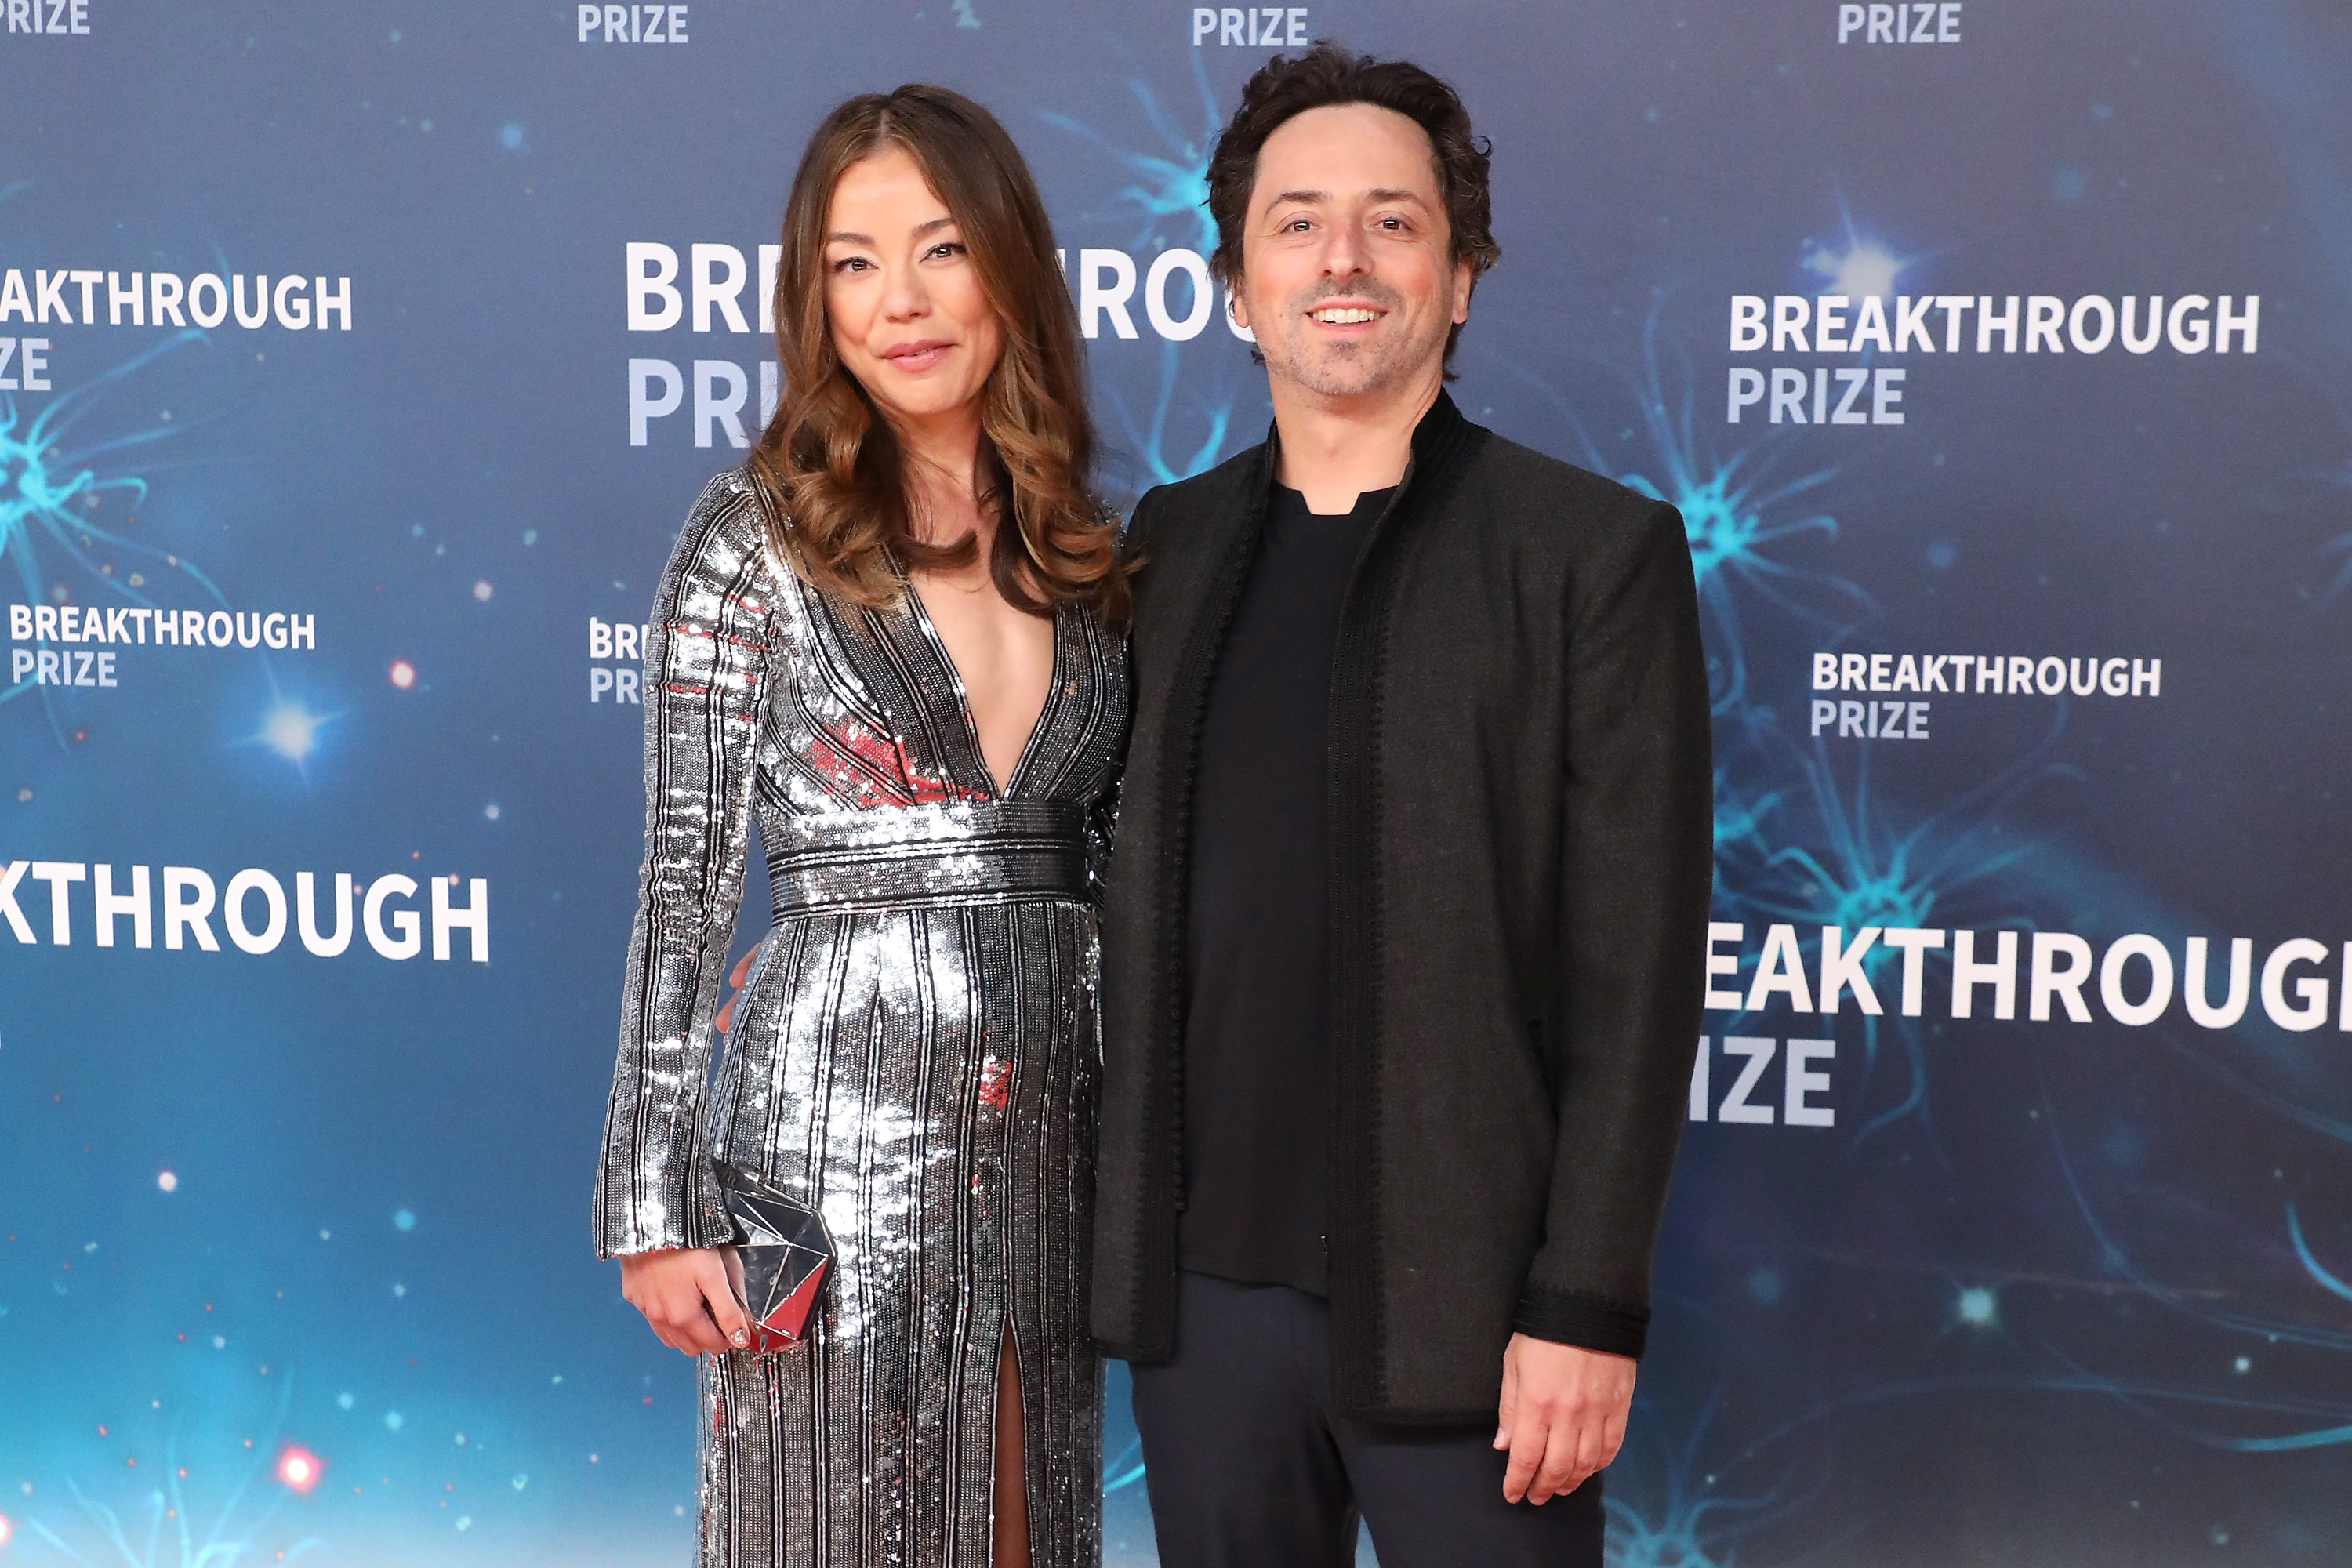 A man and woman stand together against a backdrop with &quot;Breakthrough Prize&quot; written, both dressed for a formal event.